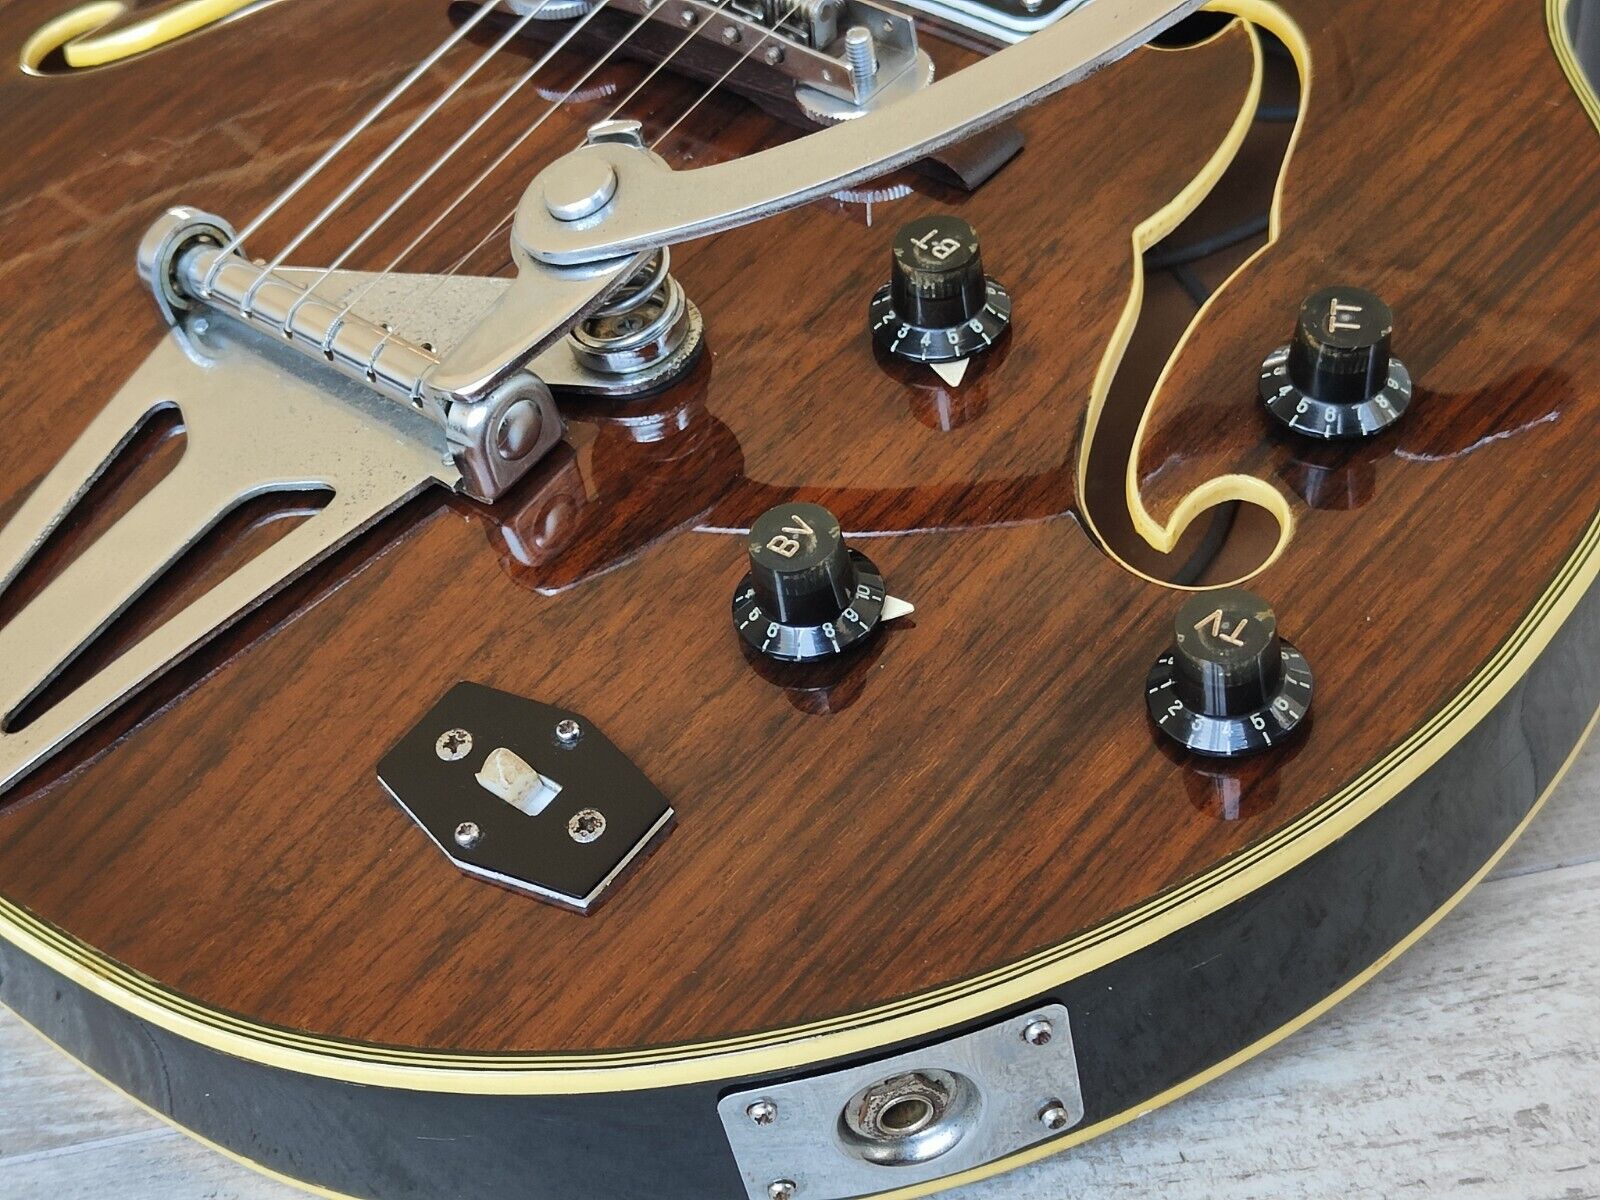 1967 Ibanez Japan Stereo Hollowbody Electric Guitar (Brown)